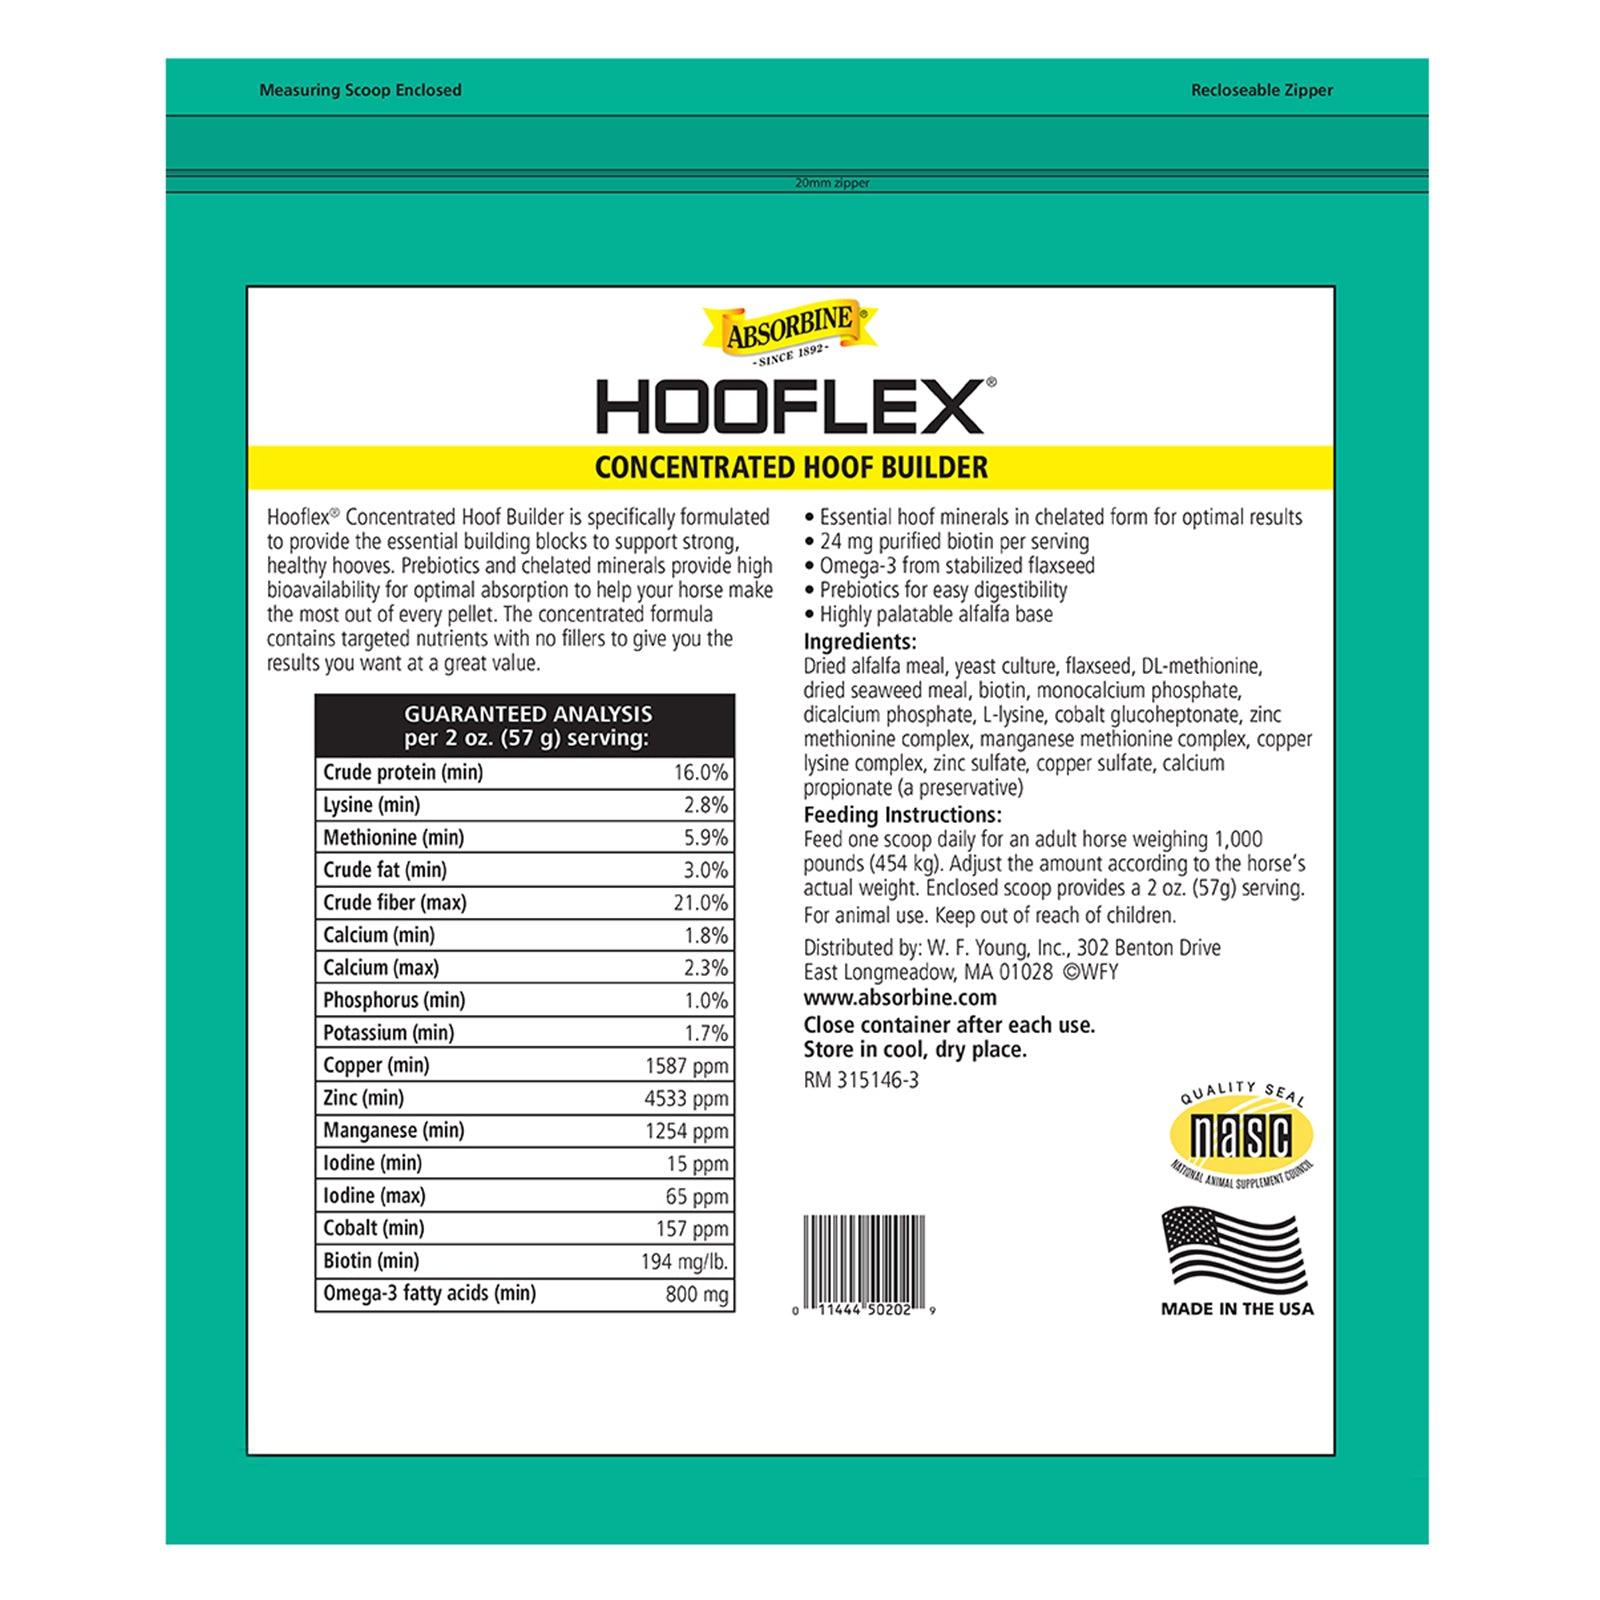 Absorbine Hooflex concentrated hoof builder back label, with a quality seal from NASC, made in the USA.